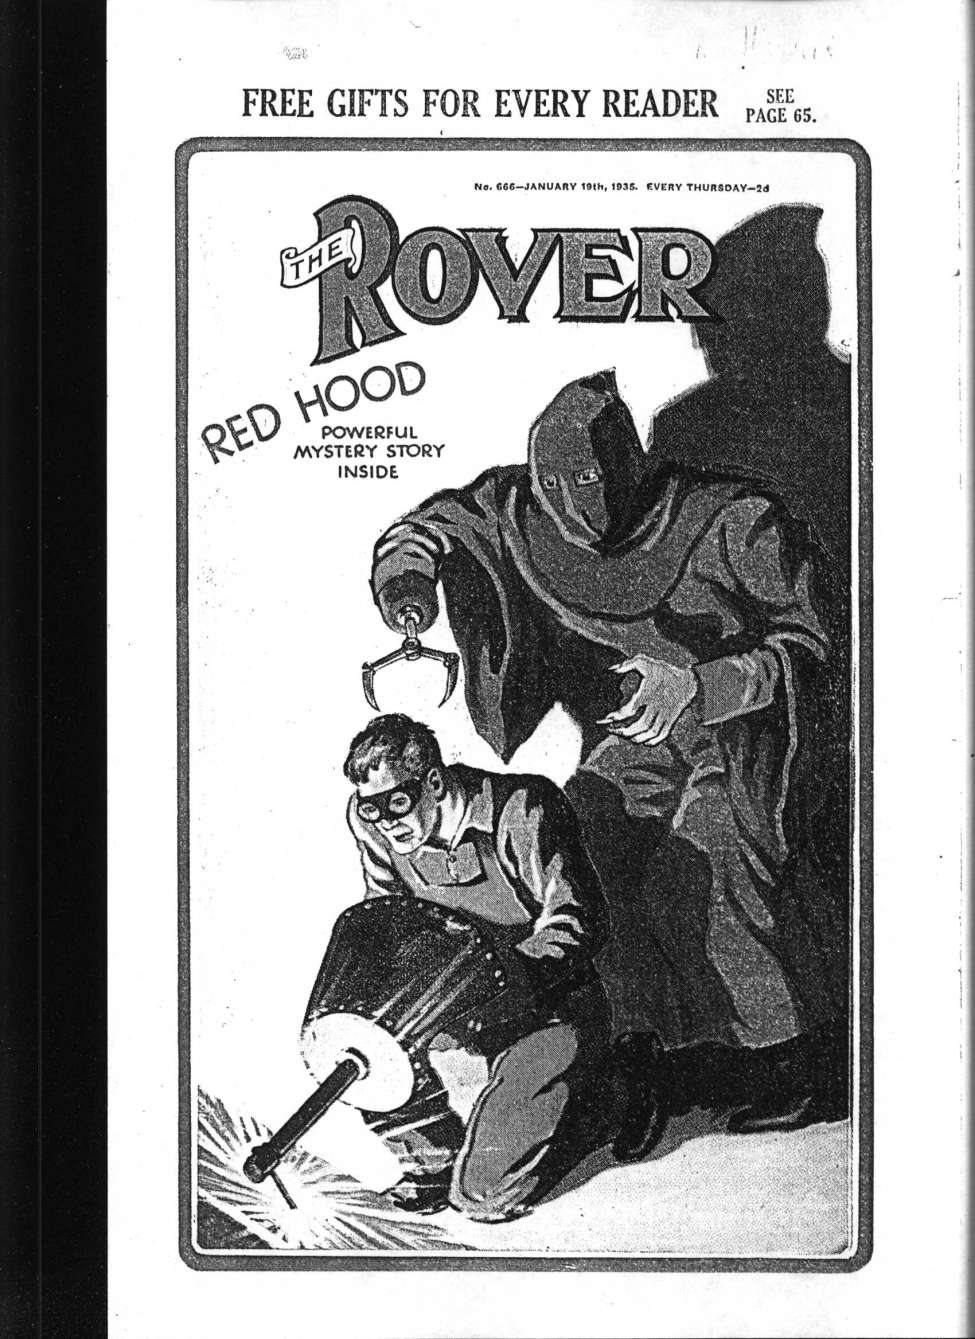 Book Cover For The Rover 666